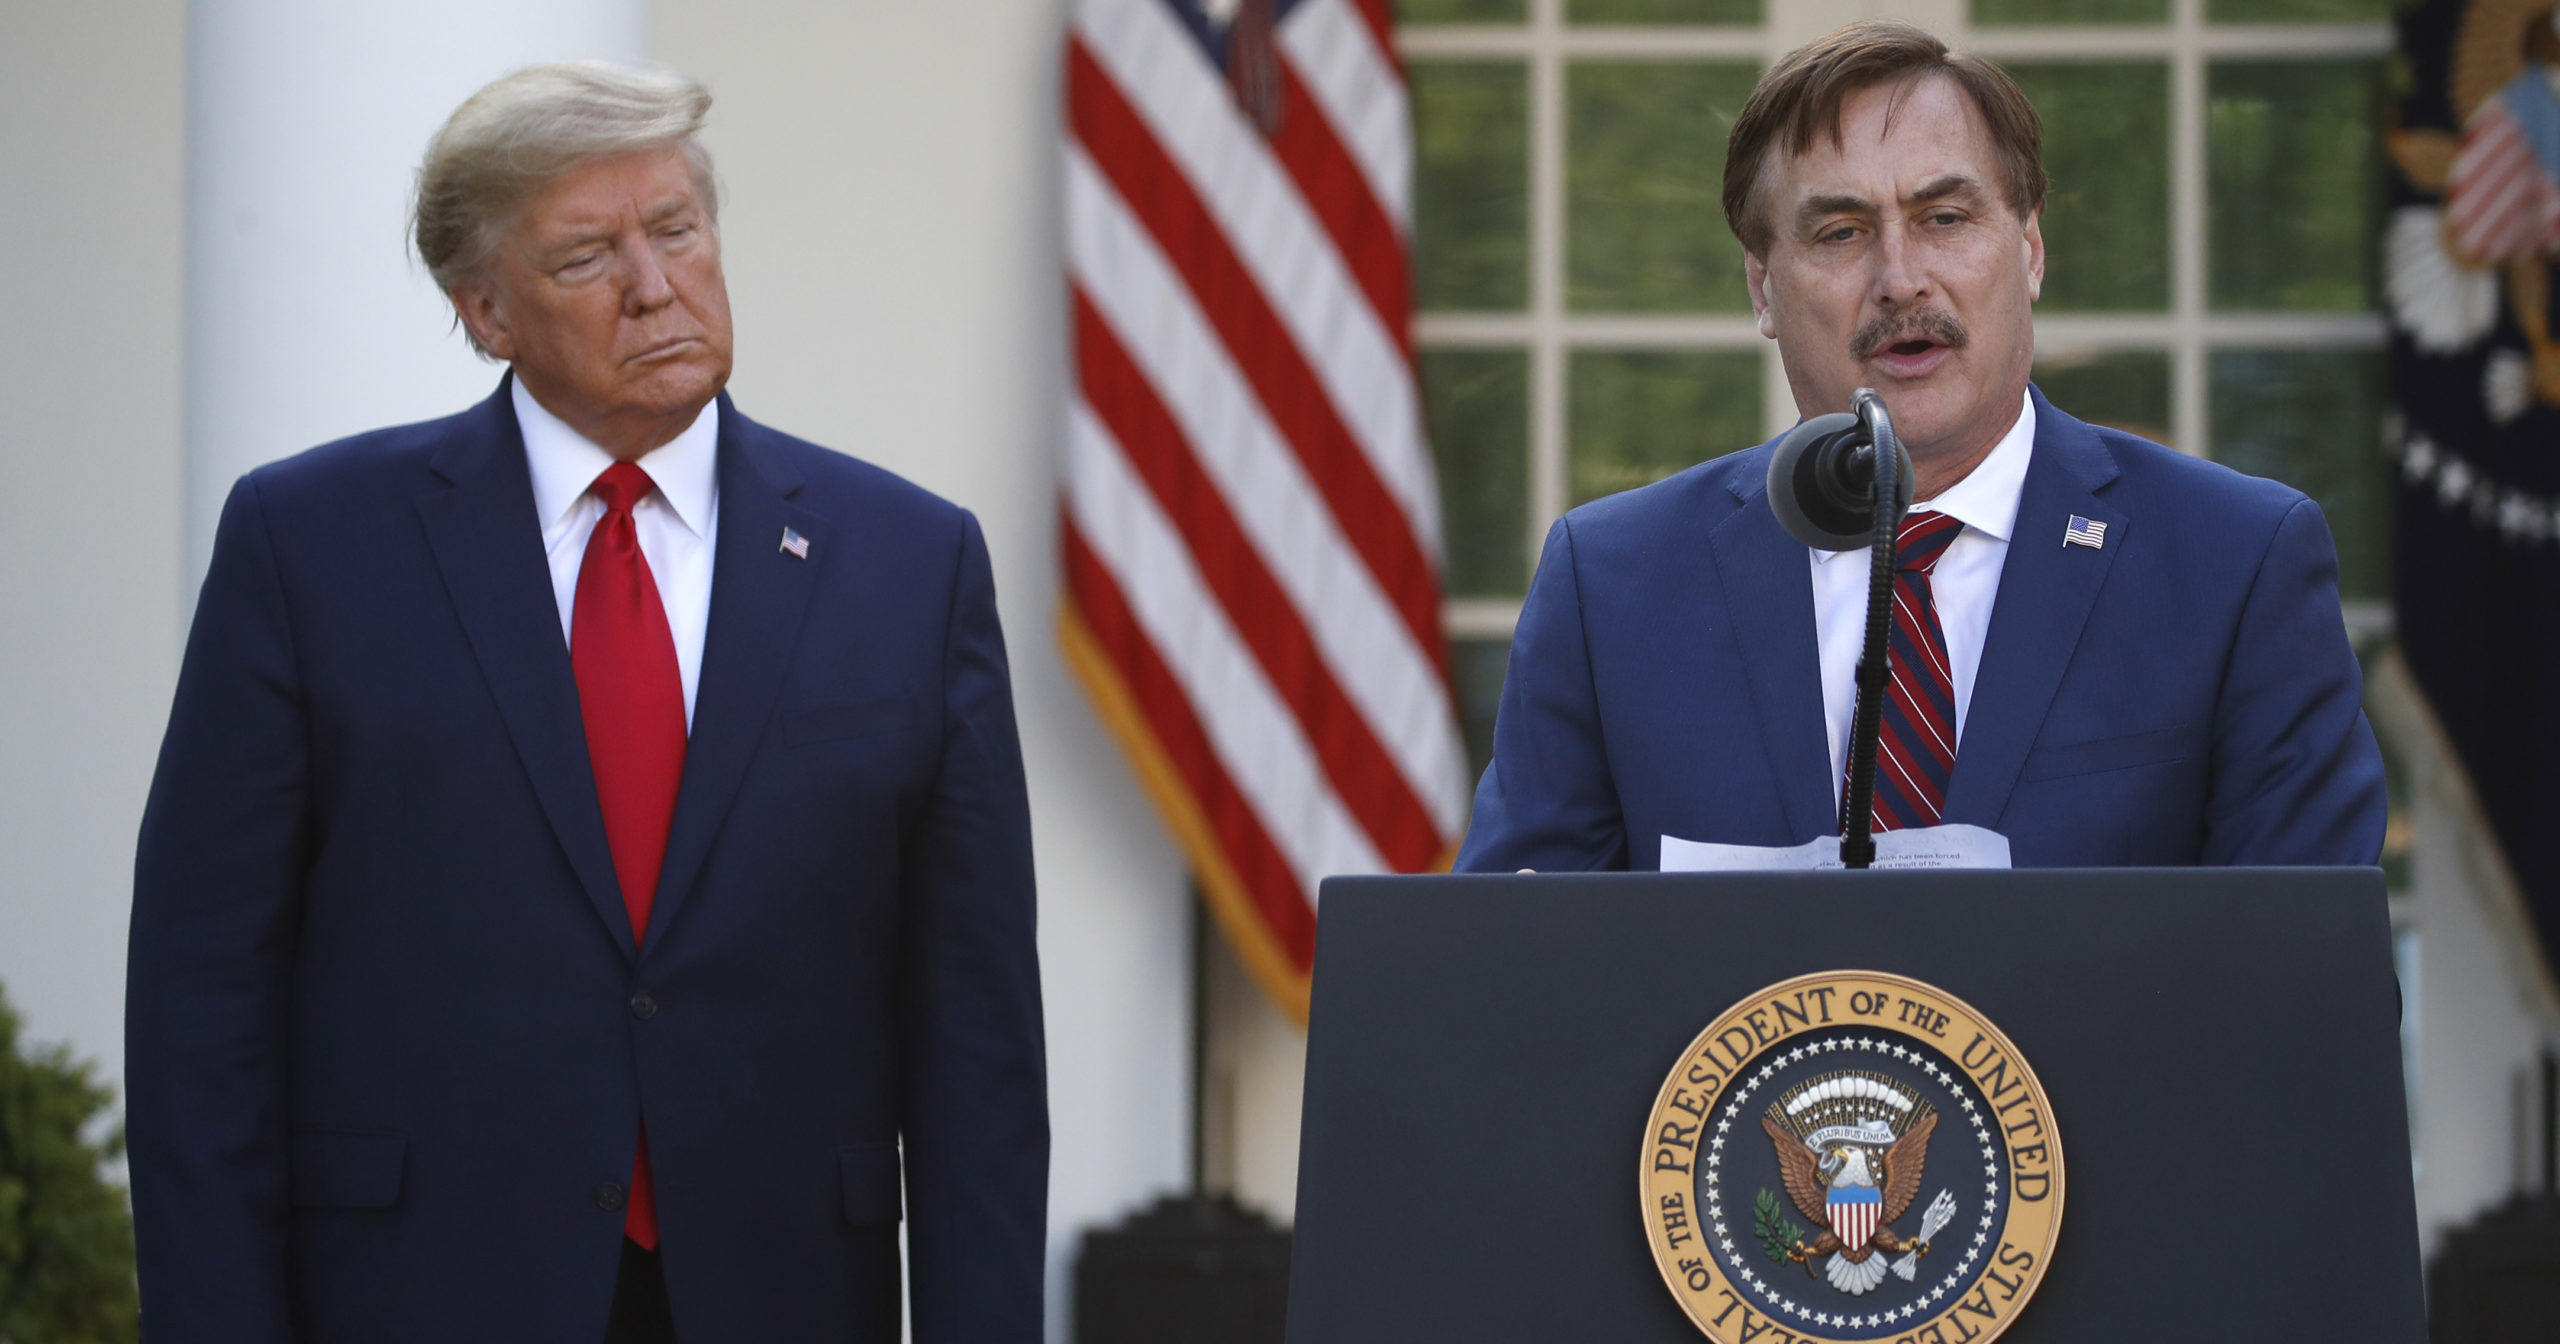 MyPillow CEO Mike Lindell speaks as President Donald Trump listens during a briefing in the Rose Garden of the White House in Washington, D.C., on March 30, 2020.